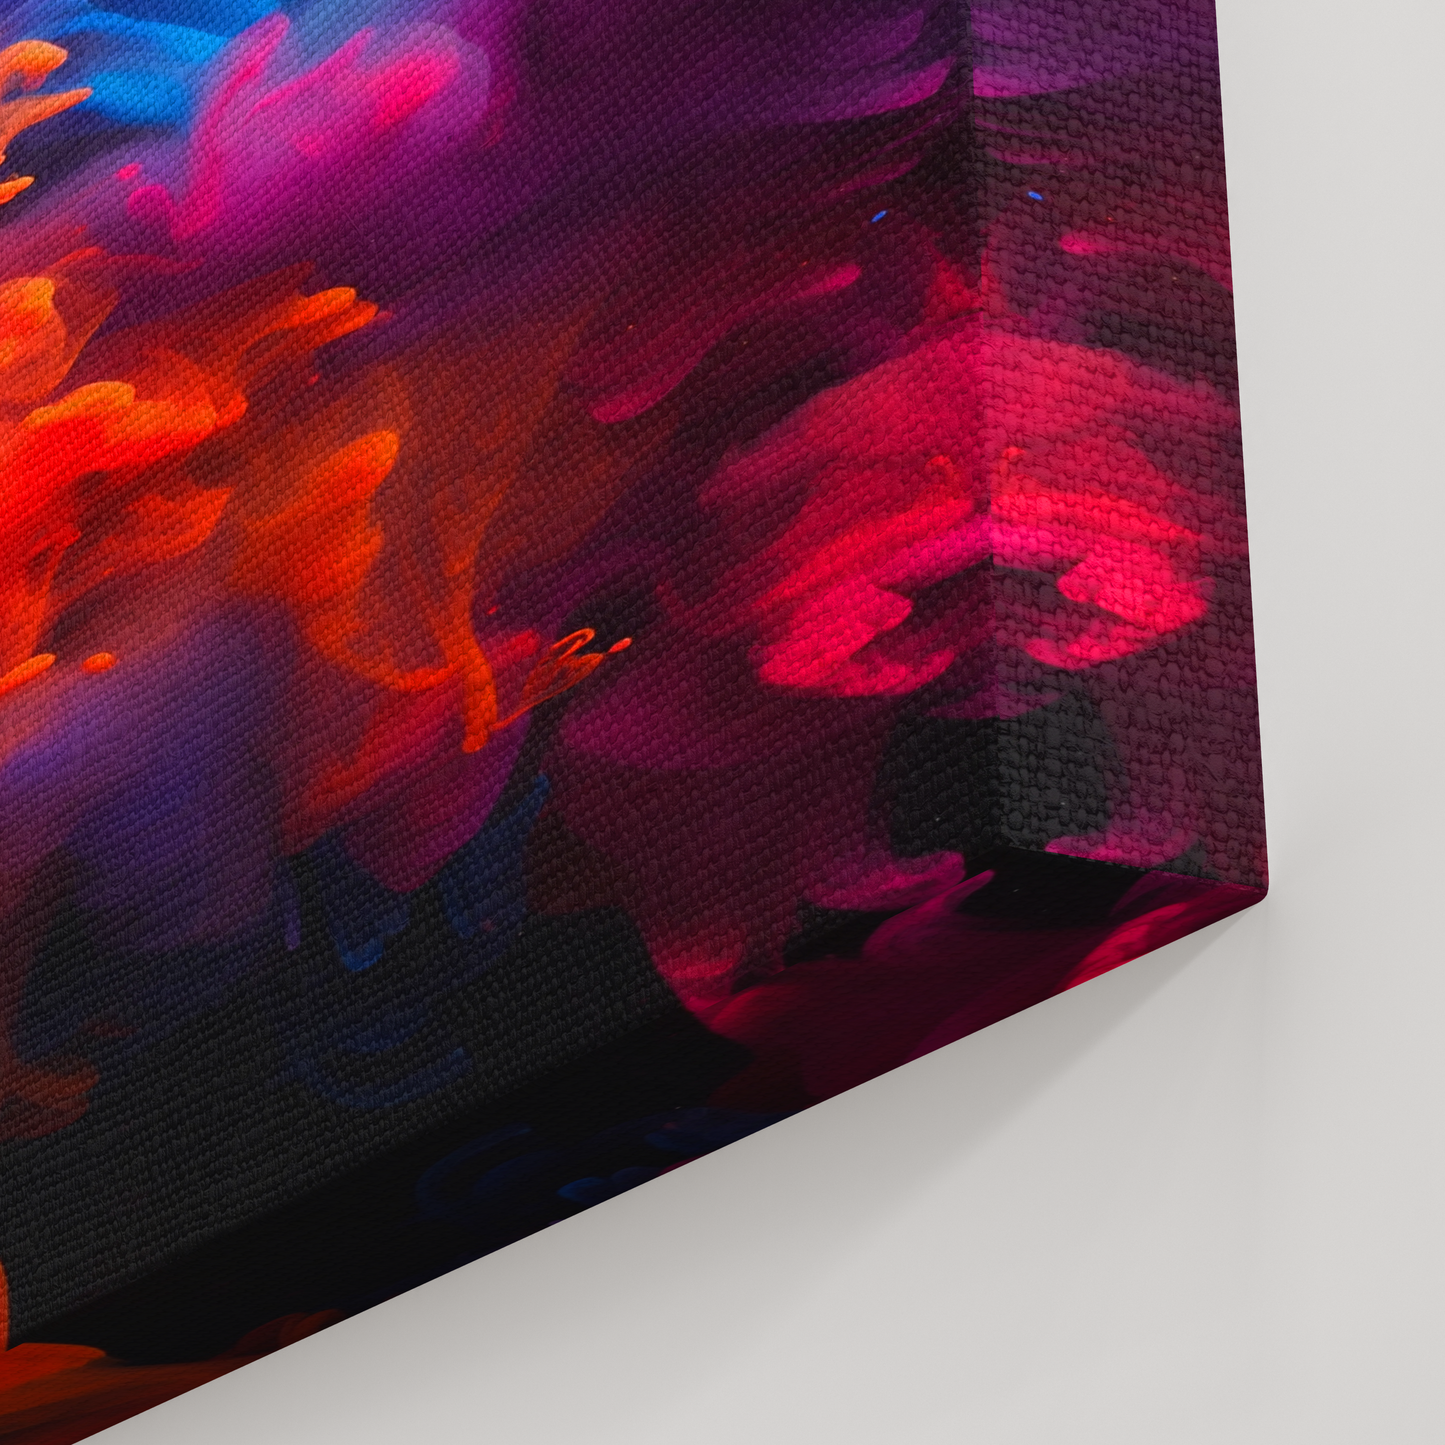 Vivid Eruption (Canvas)Vivid Eruption (Canvas  Matte finish, stretched, with a depth of 1.25 inches) Elevate your décor with RimaGallery’s responsibly made art canvases. Our eco-friendly mRimaGallery